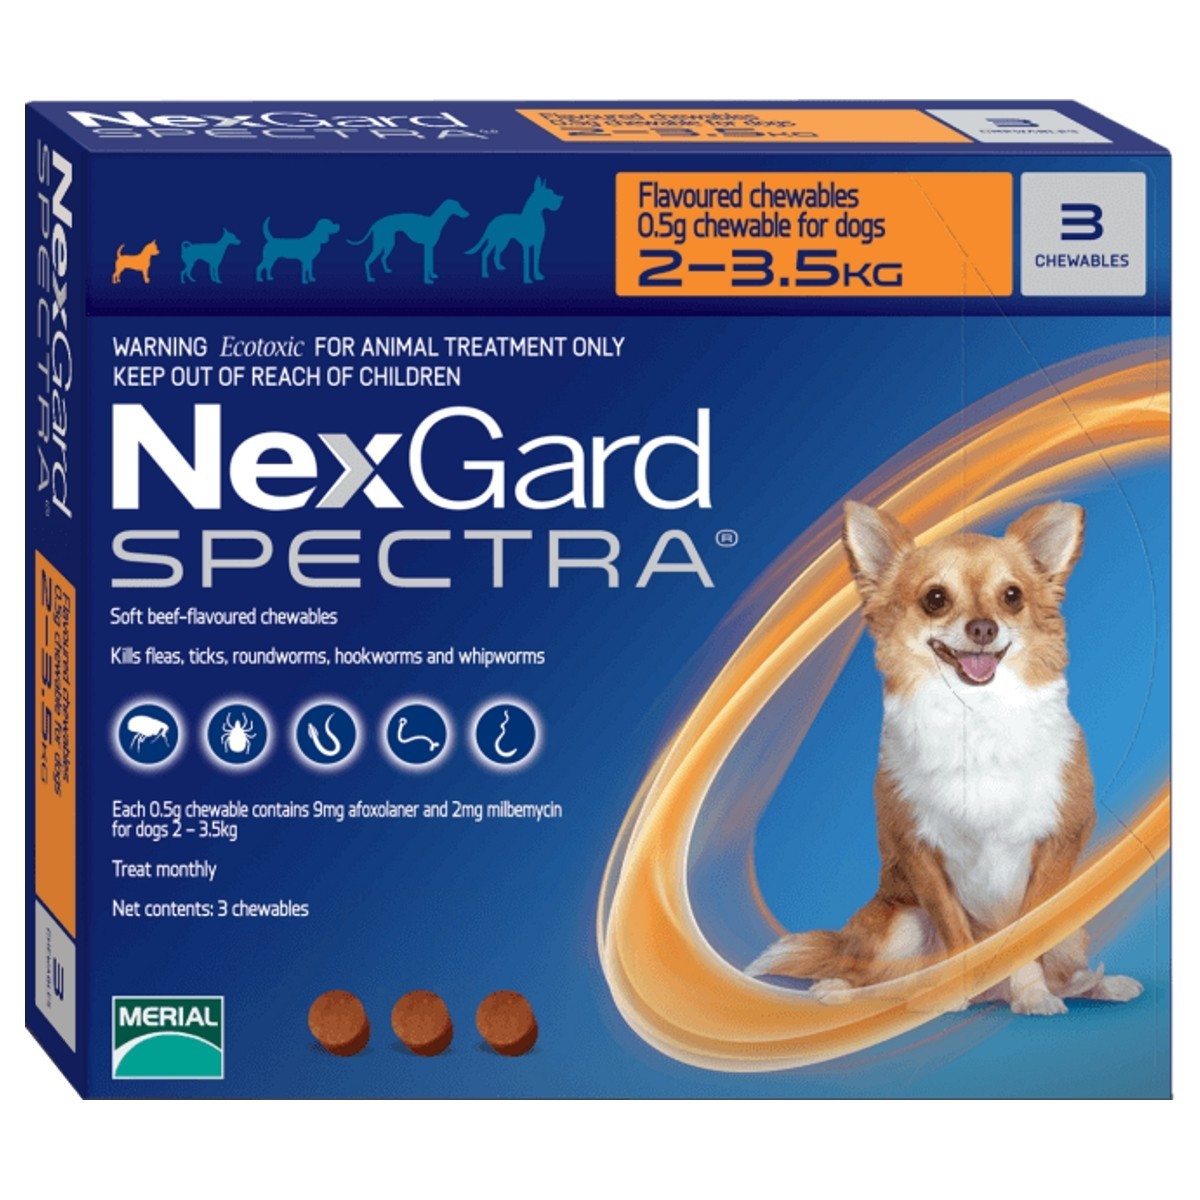 NexGard Spectra Chewable Tablets for 